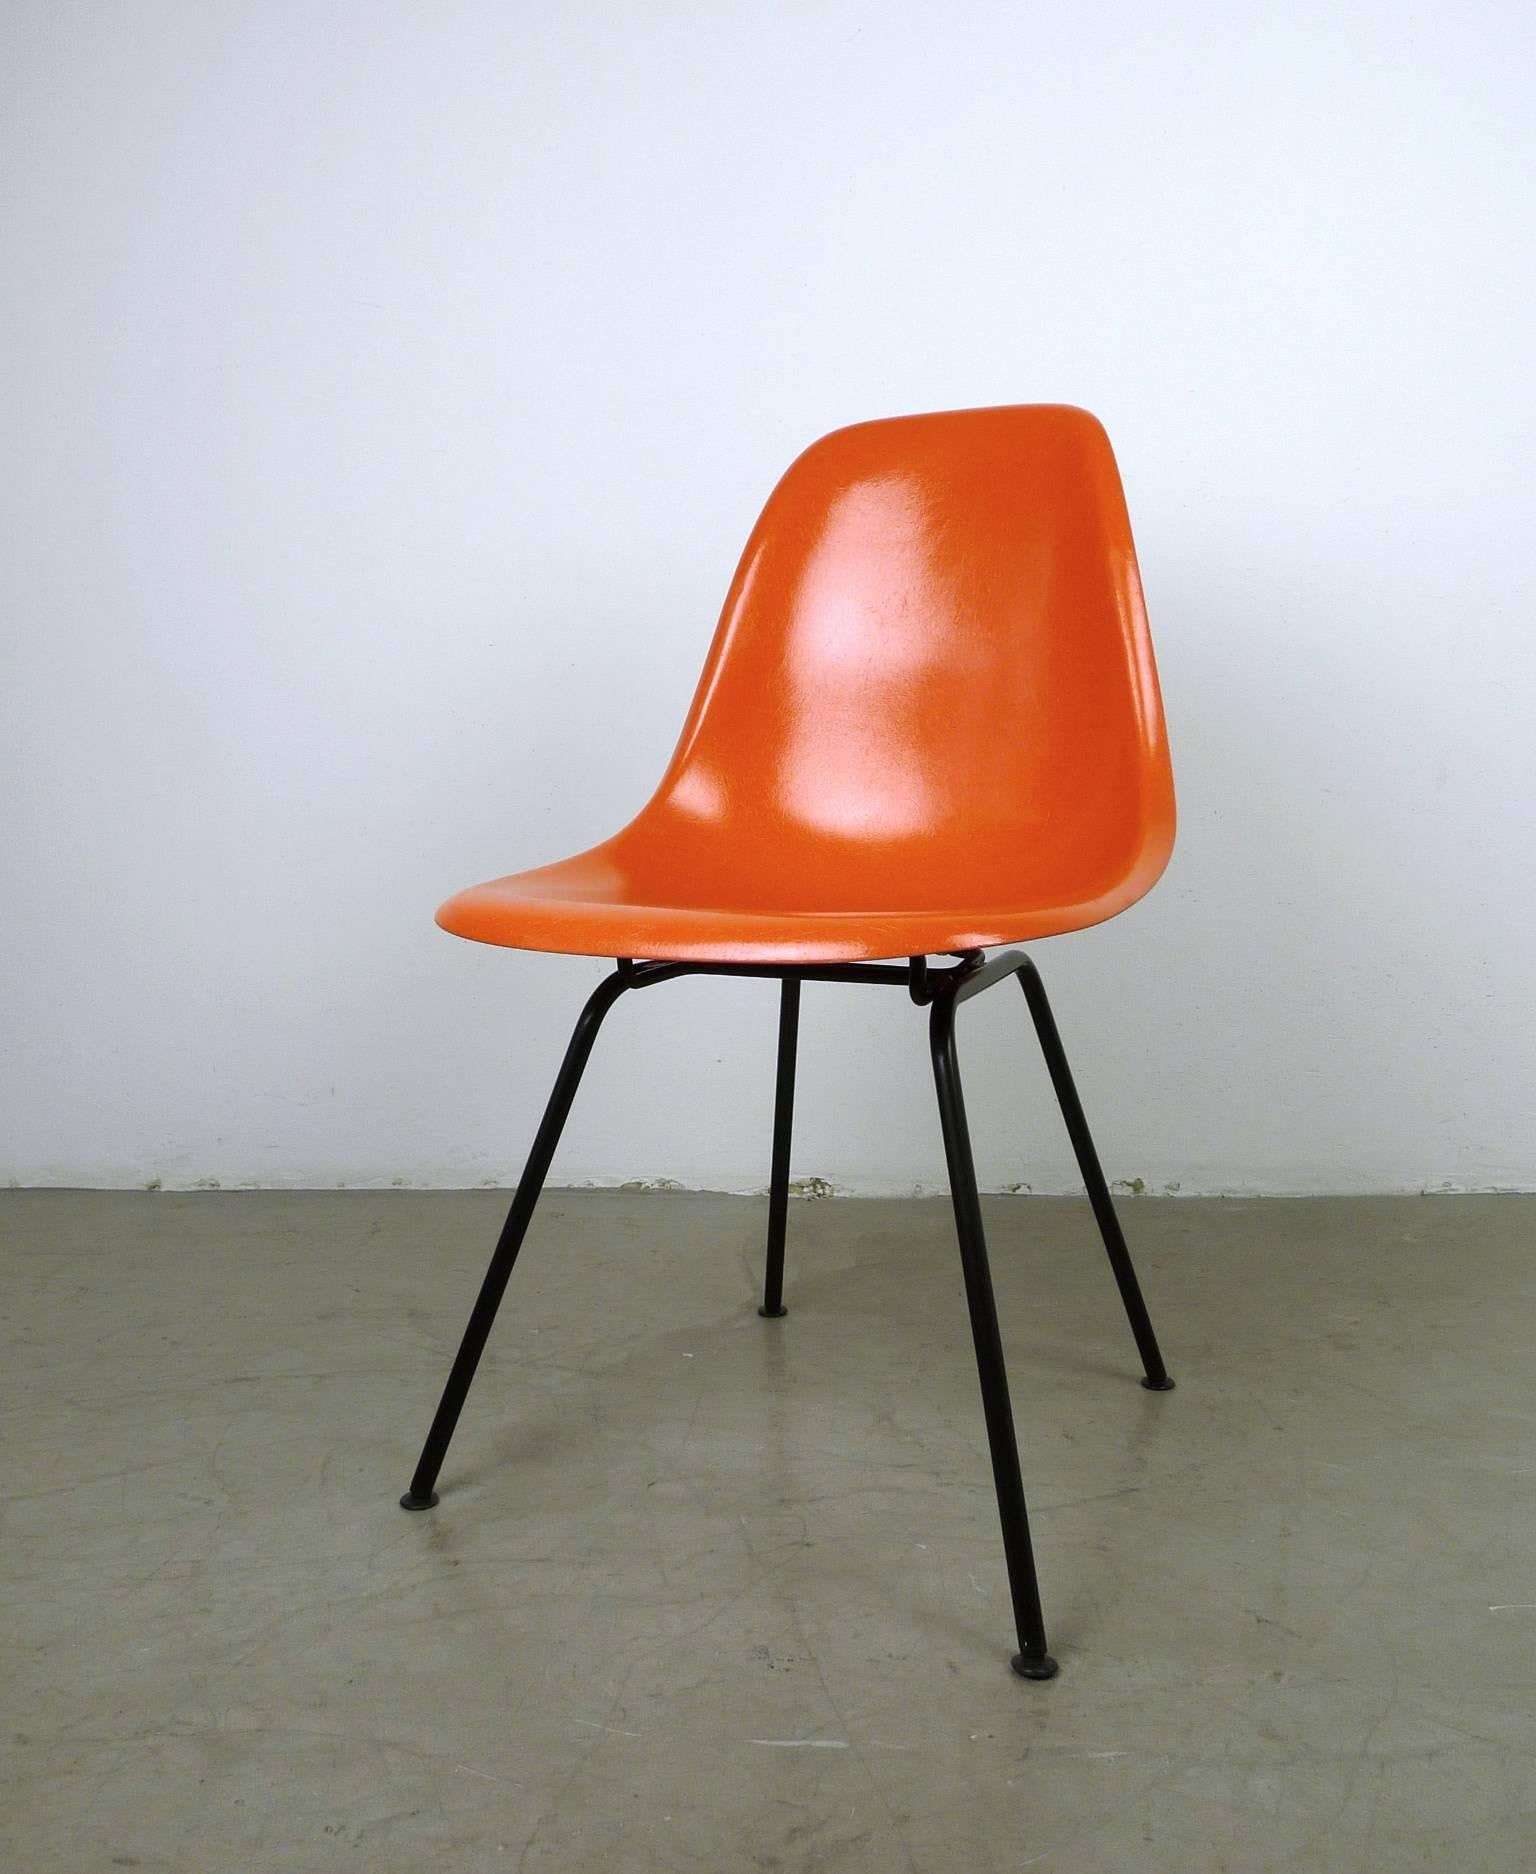 This 'Dining Height Side Chair X-Base' (DSX) with an orange fiberglass seat and a black base was designed by Ray and Charles Eames and produced by Herman Miller in the United States in the 1970s. The chair is in very good condition.